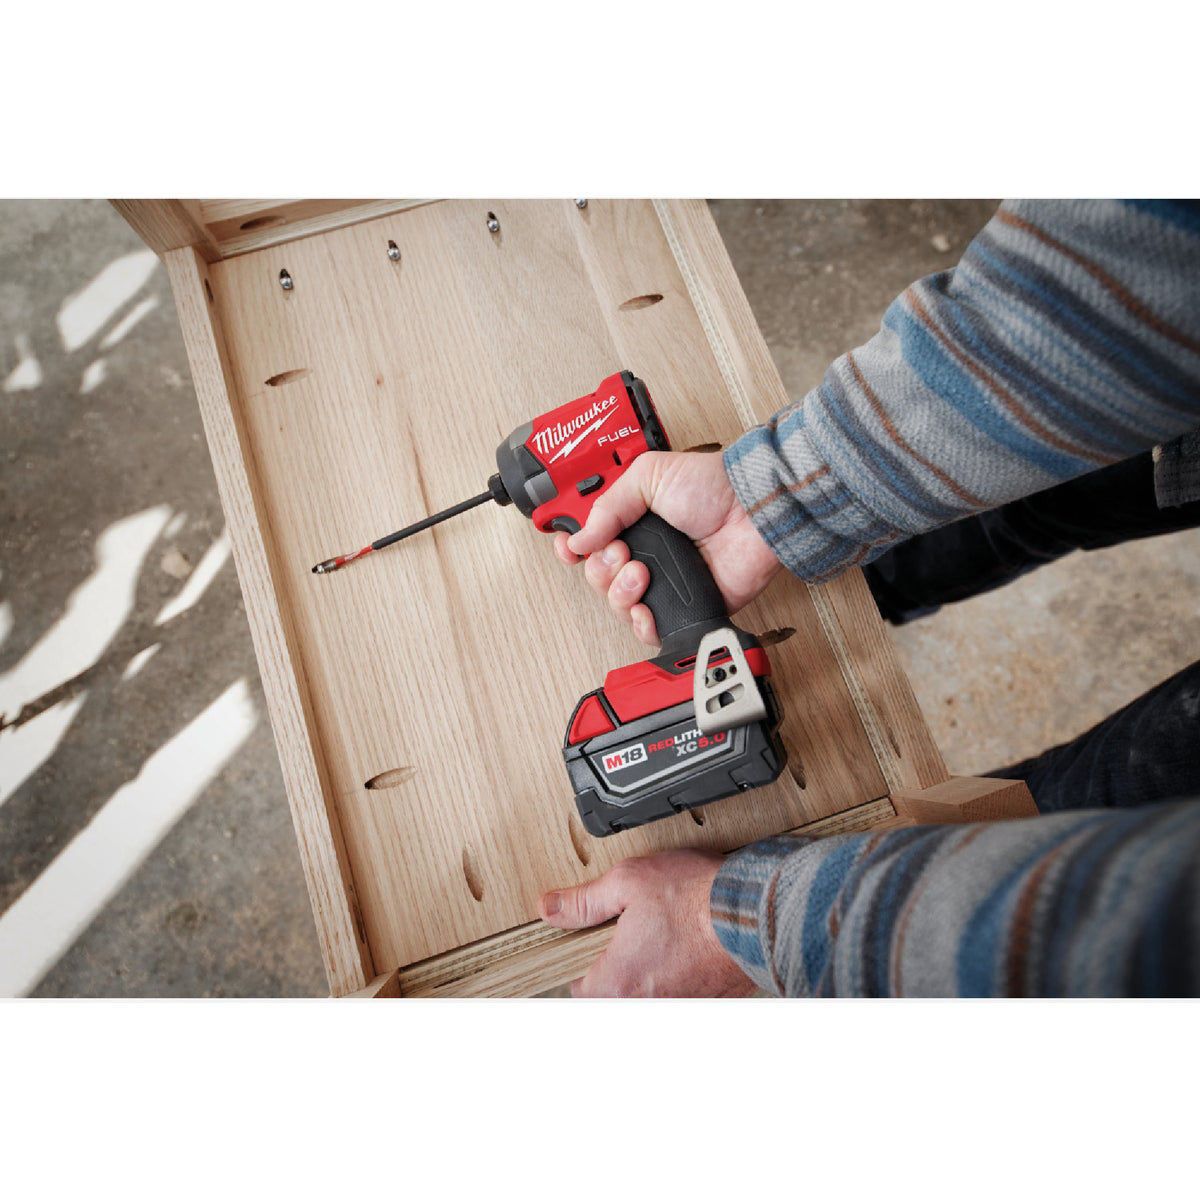 Milwaukee M18 FUEL Brushless 1/4 In. Hex Cordless Impact Driver Kit with  (2) 5.0 Ah Batteries & Charger - Farr's Hardware